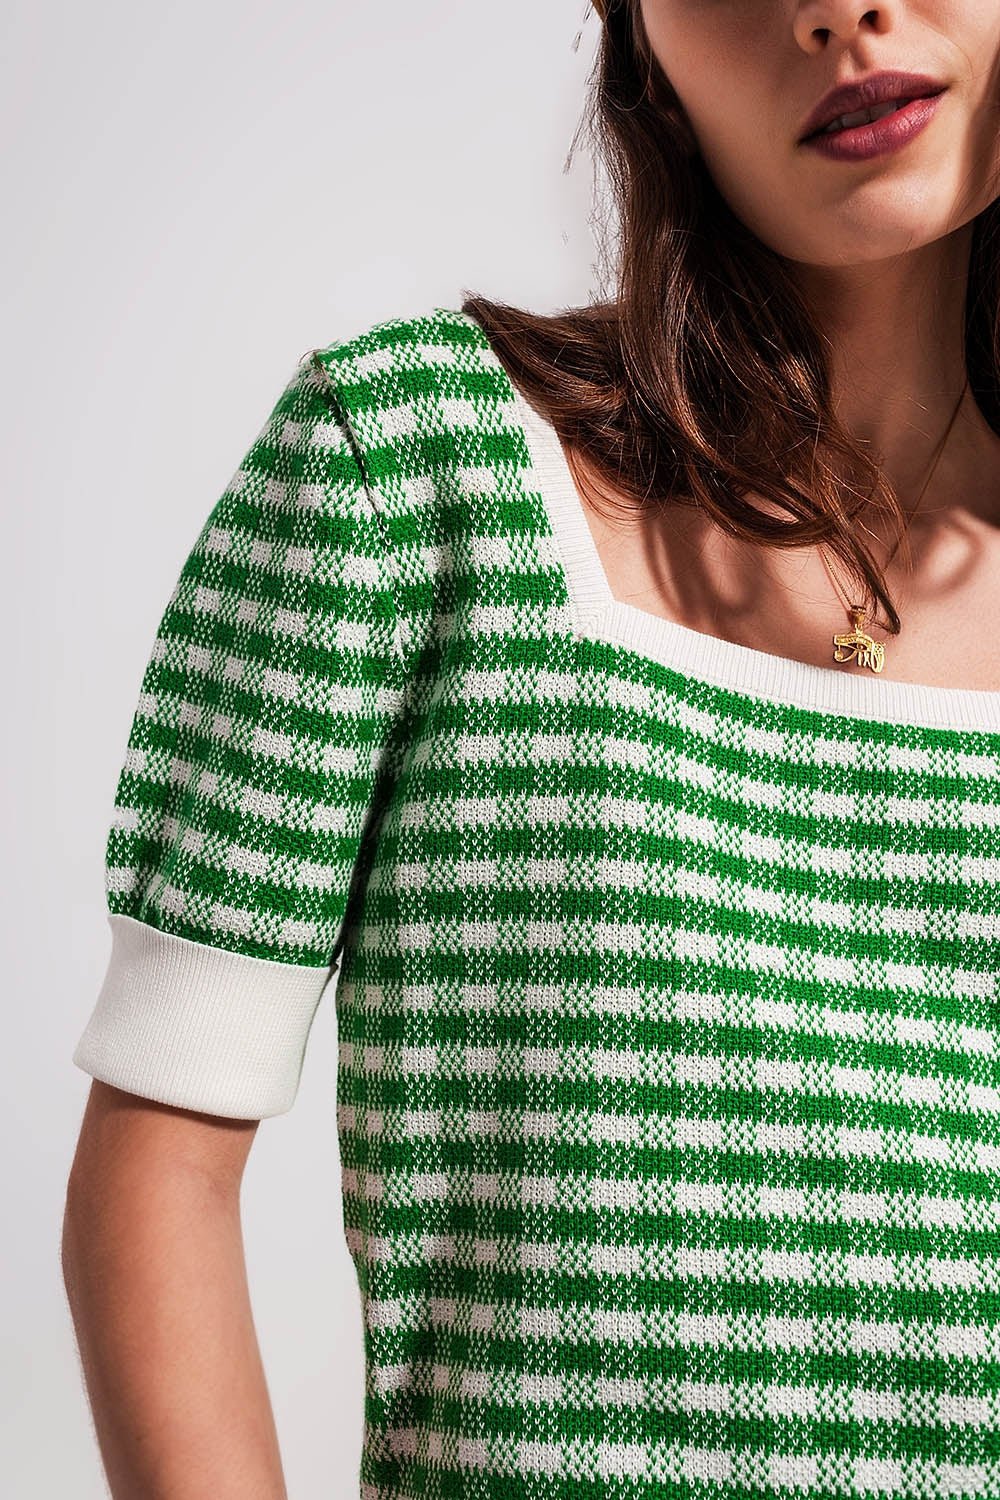 Square Neck Jumper in Green and White - Mack & Harvie